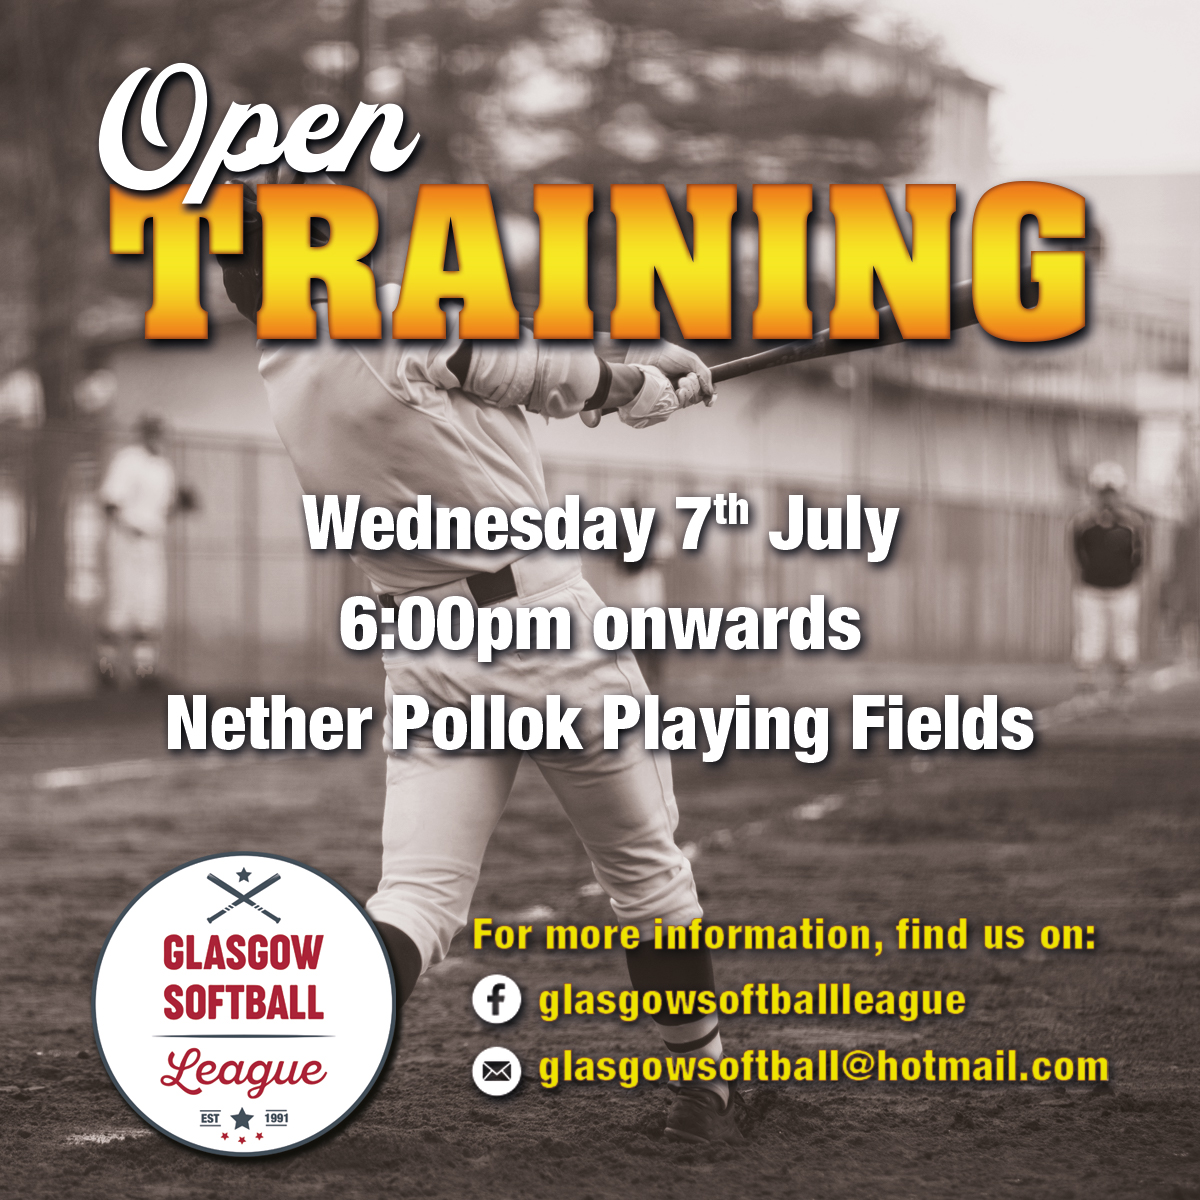 Open training wednesday 7th july 6:00pm onwards at Nether Pollock Playing fields.